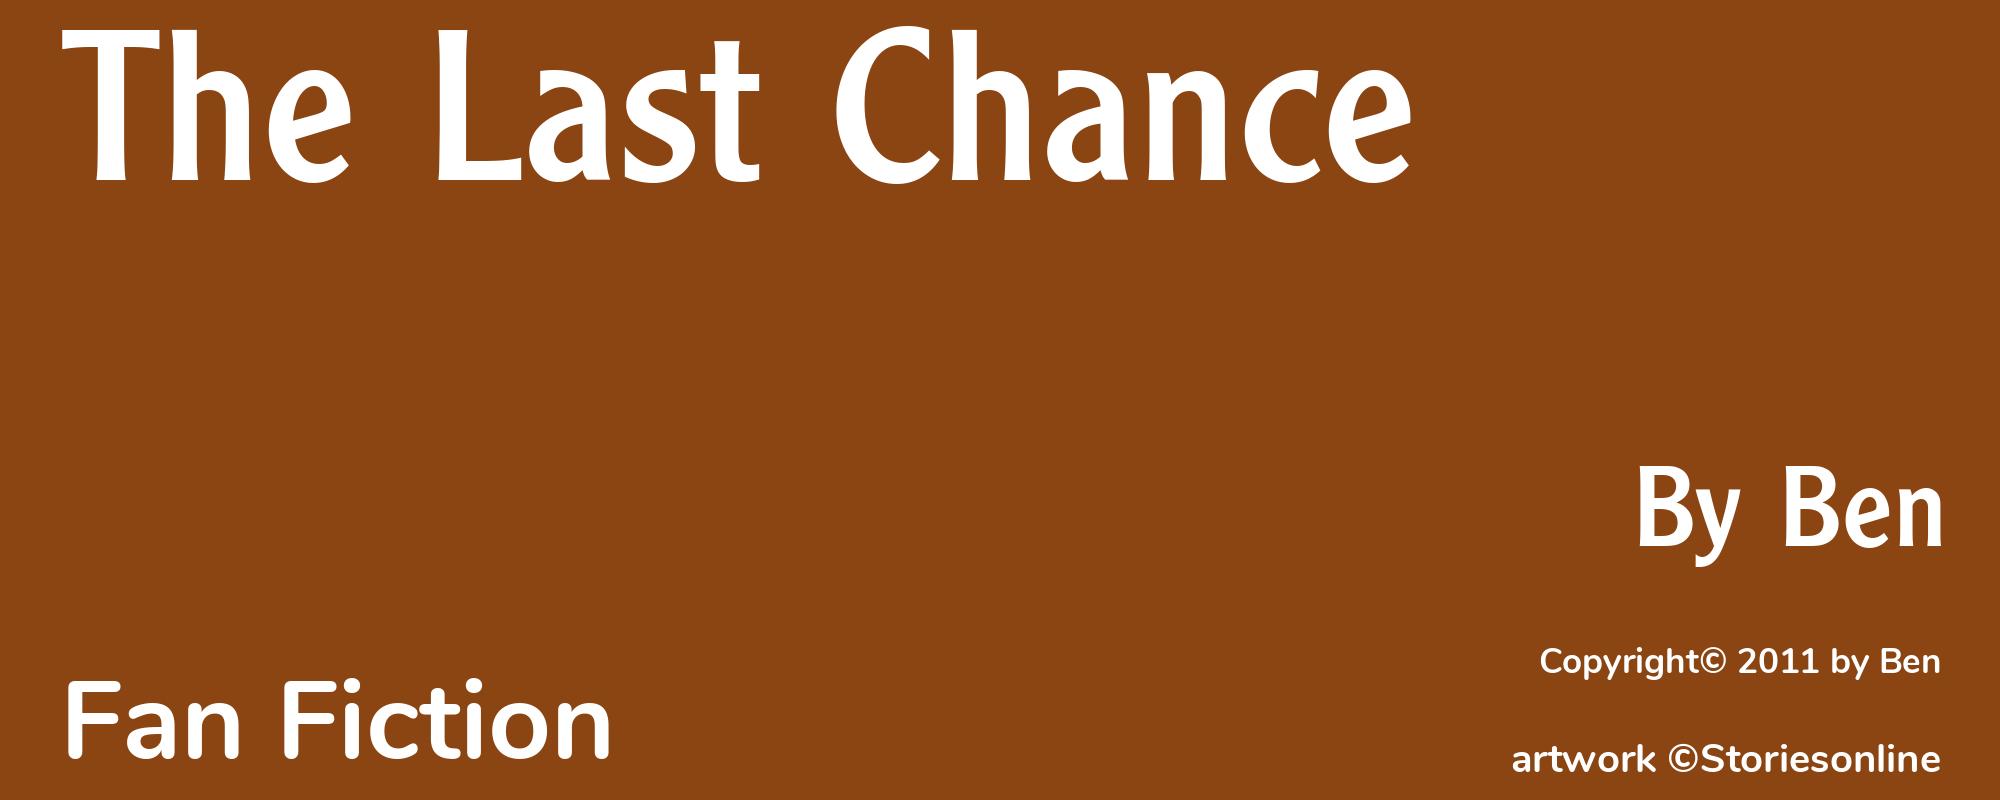 The Last Chance - Cover